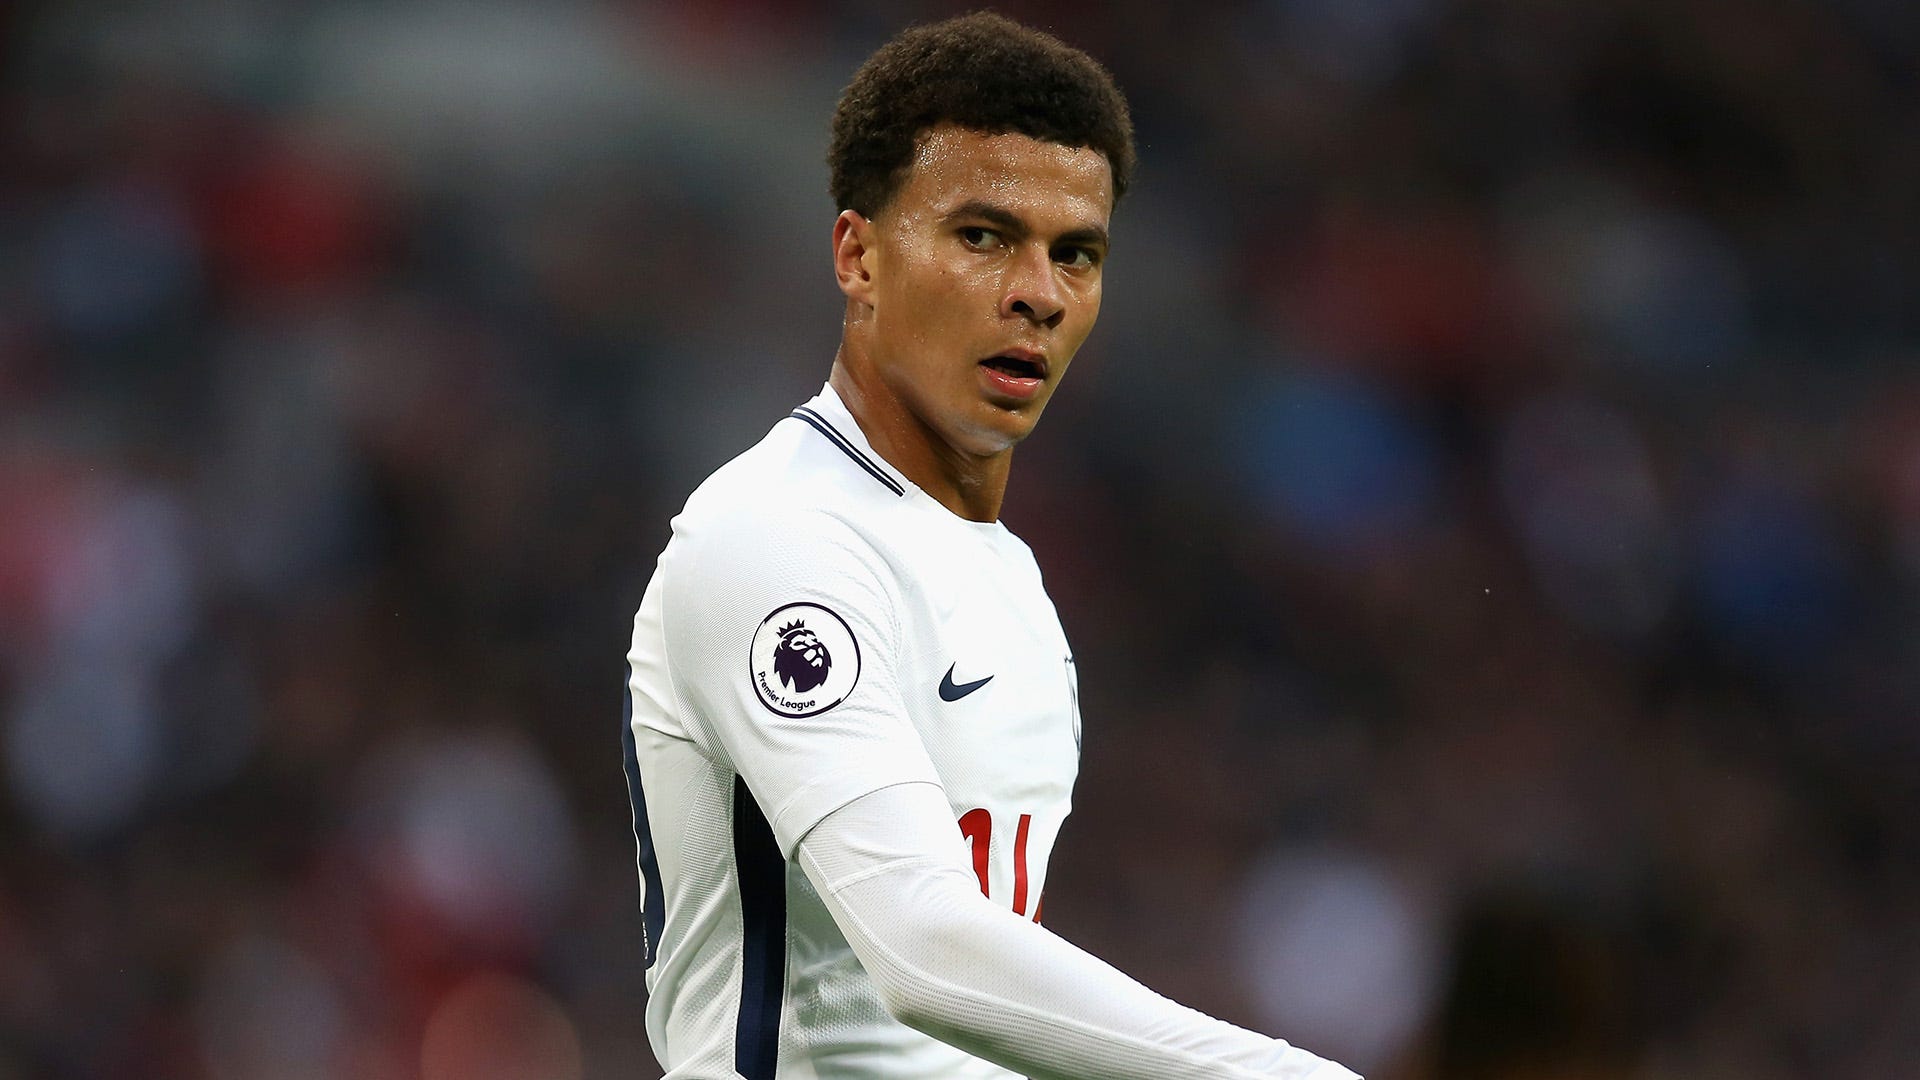 Tottenham Hotspur news: Dele Alli ready to be a leader for Spurs